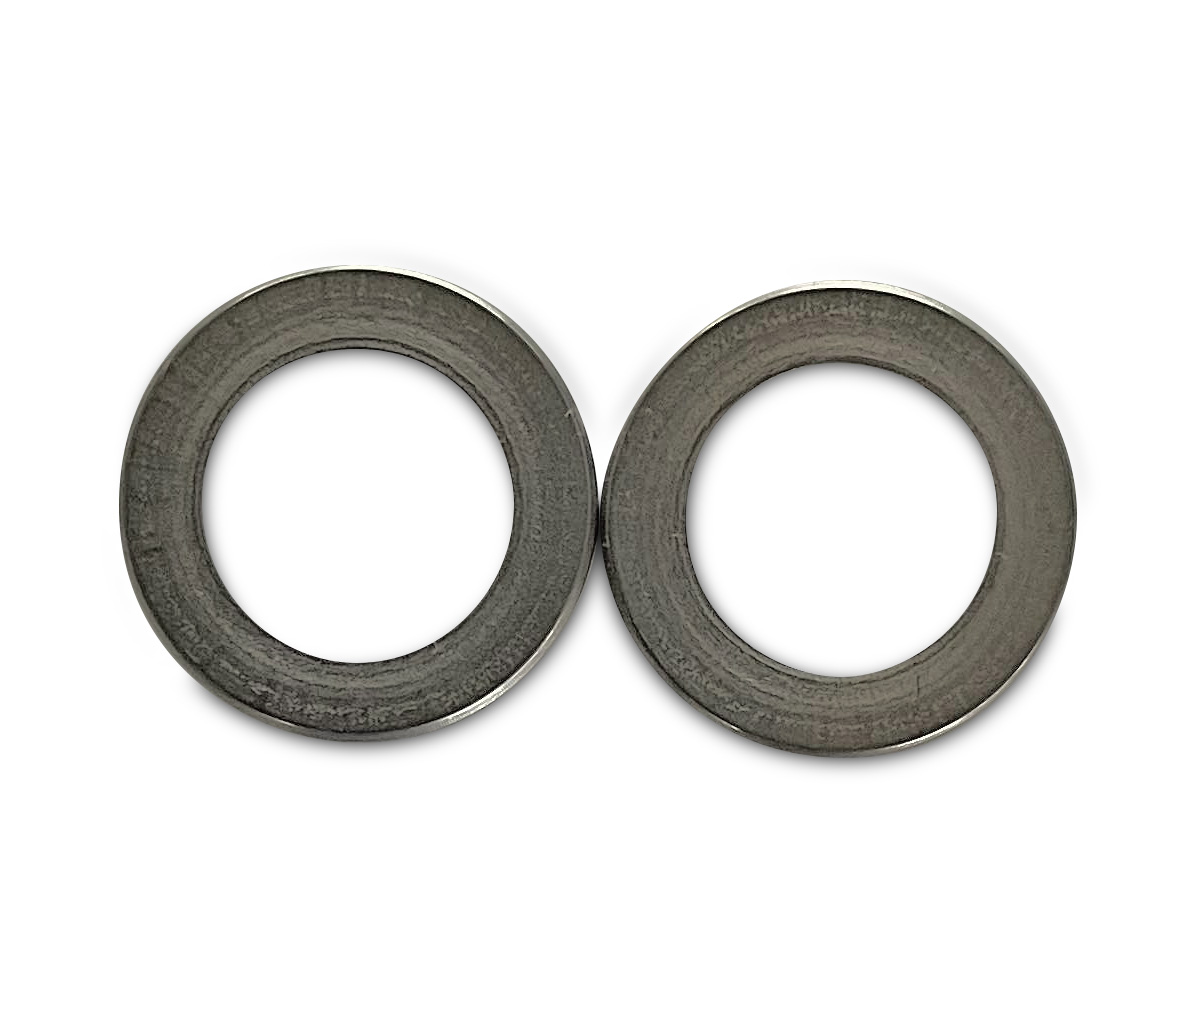 Kit of 2 washers 1 mm